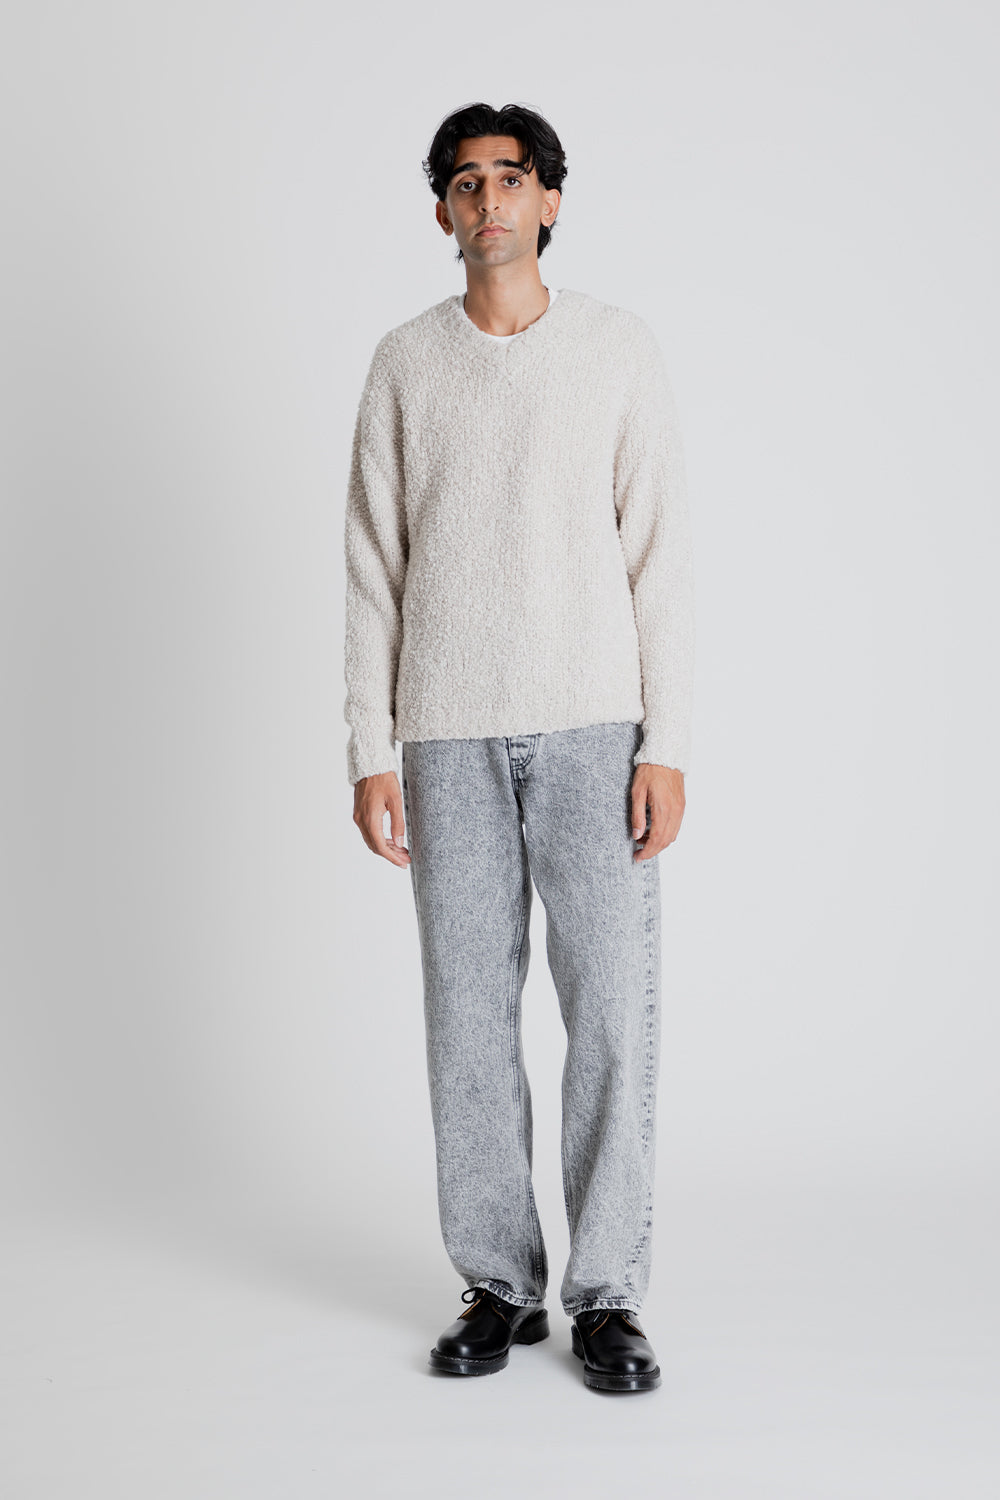 Sunflower Aske Sweater in Off White | Wallace Mercantile Shop